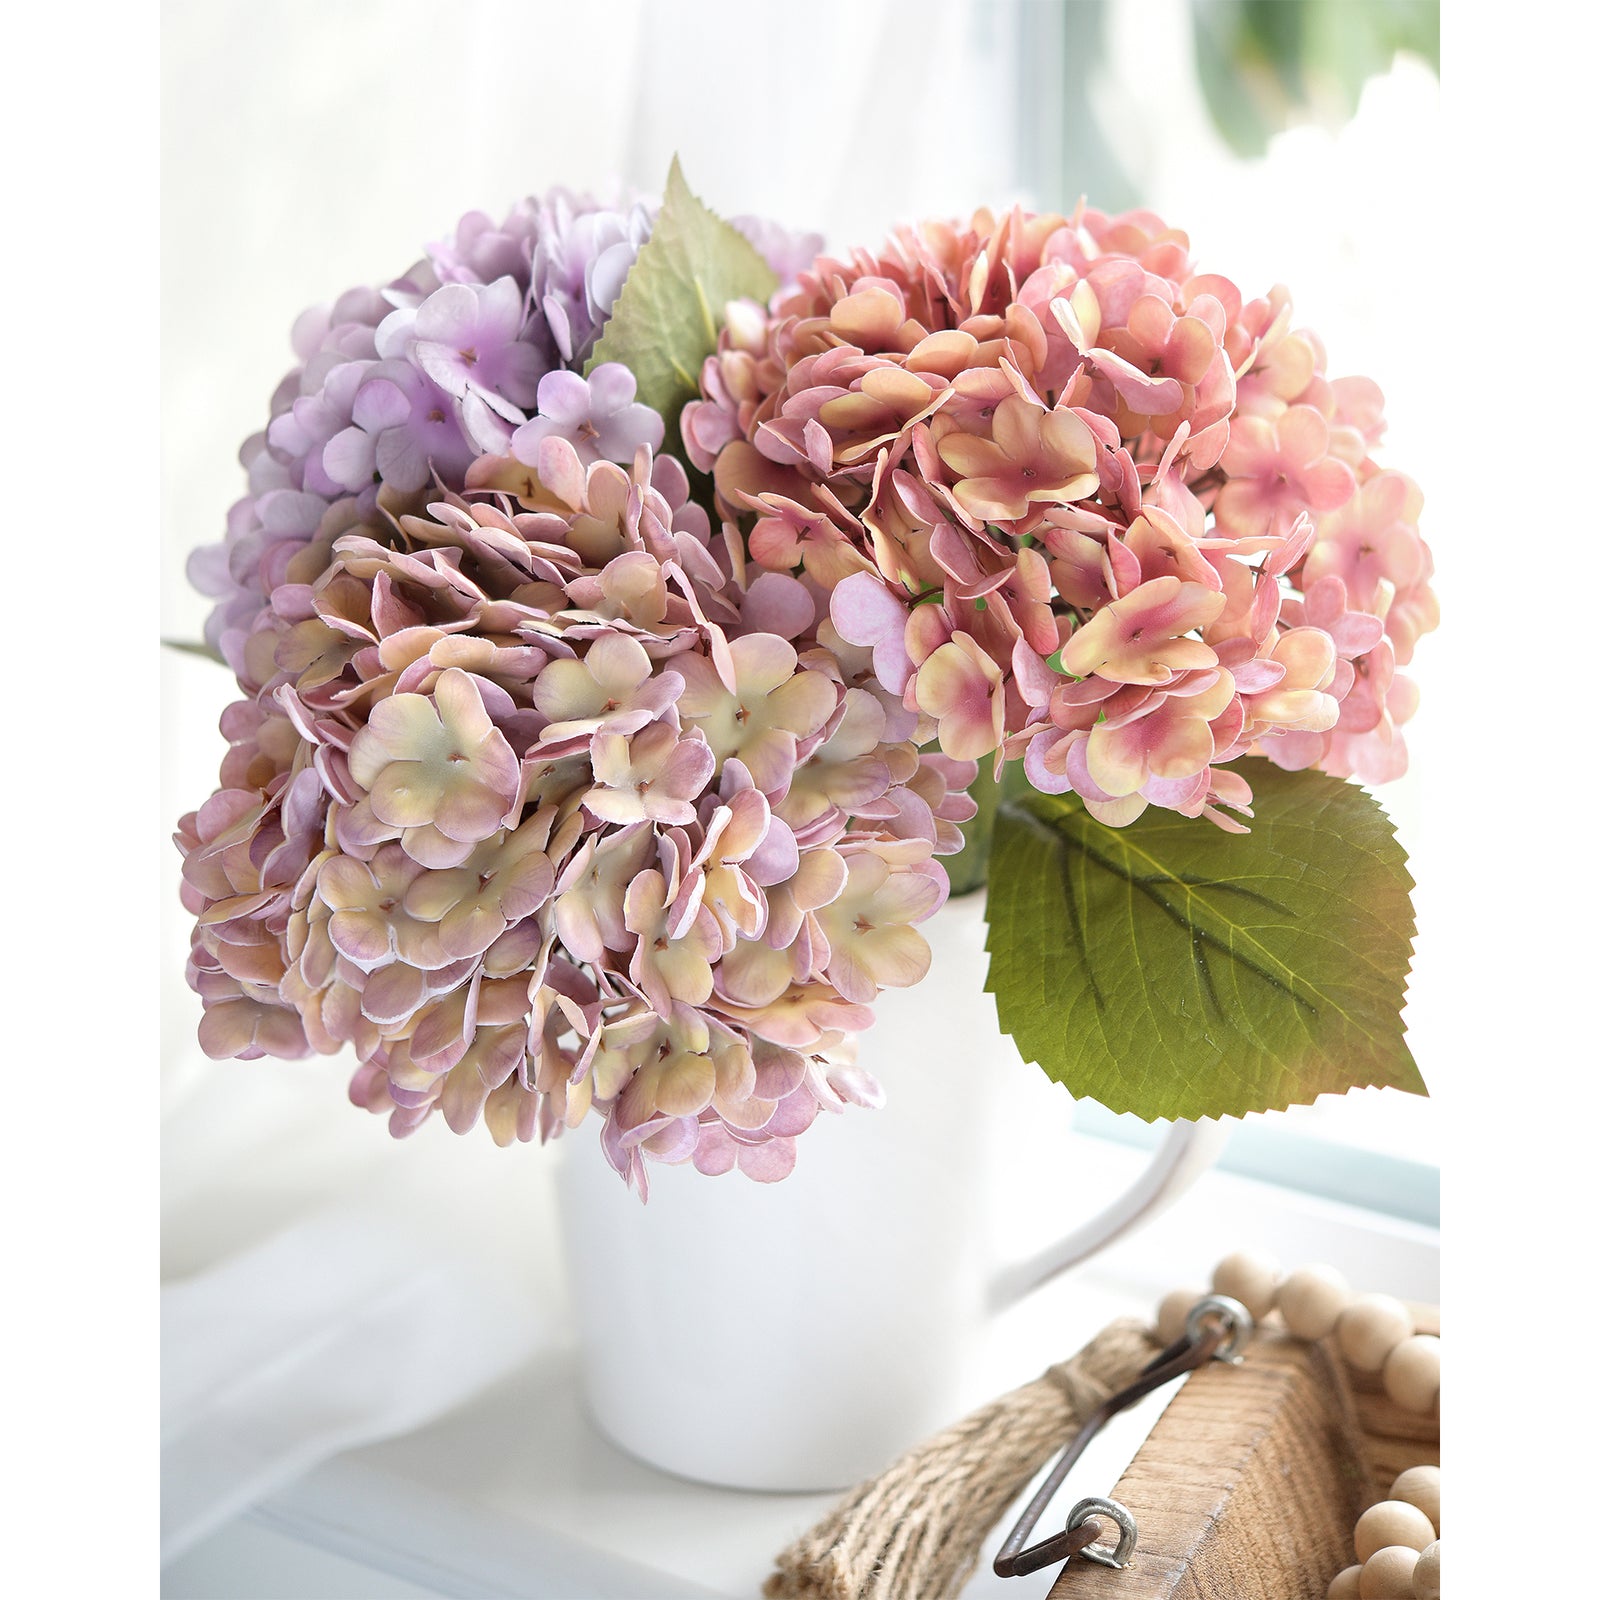 2 Long Stems Real Touch Hydrangea Artificial Flowers Ethereal Amethyst (Soft Lavender) Lifelike, Elegant, and Versatile Decor for Any Occasion (Copy) (Copy)